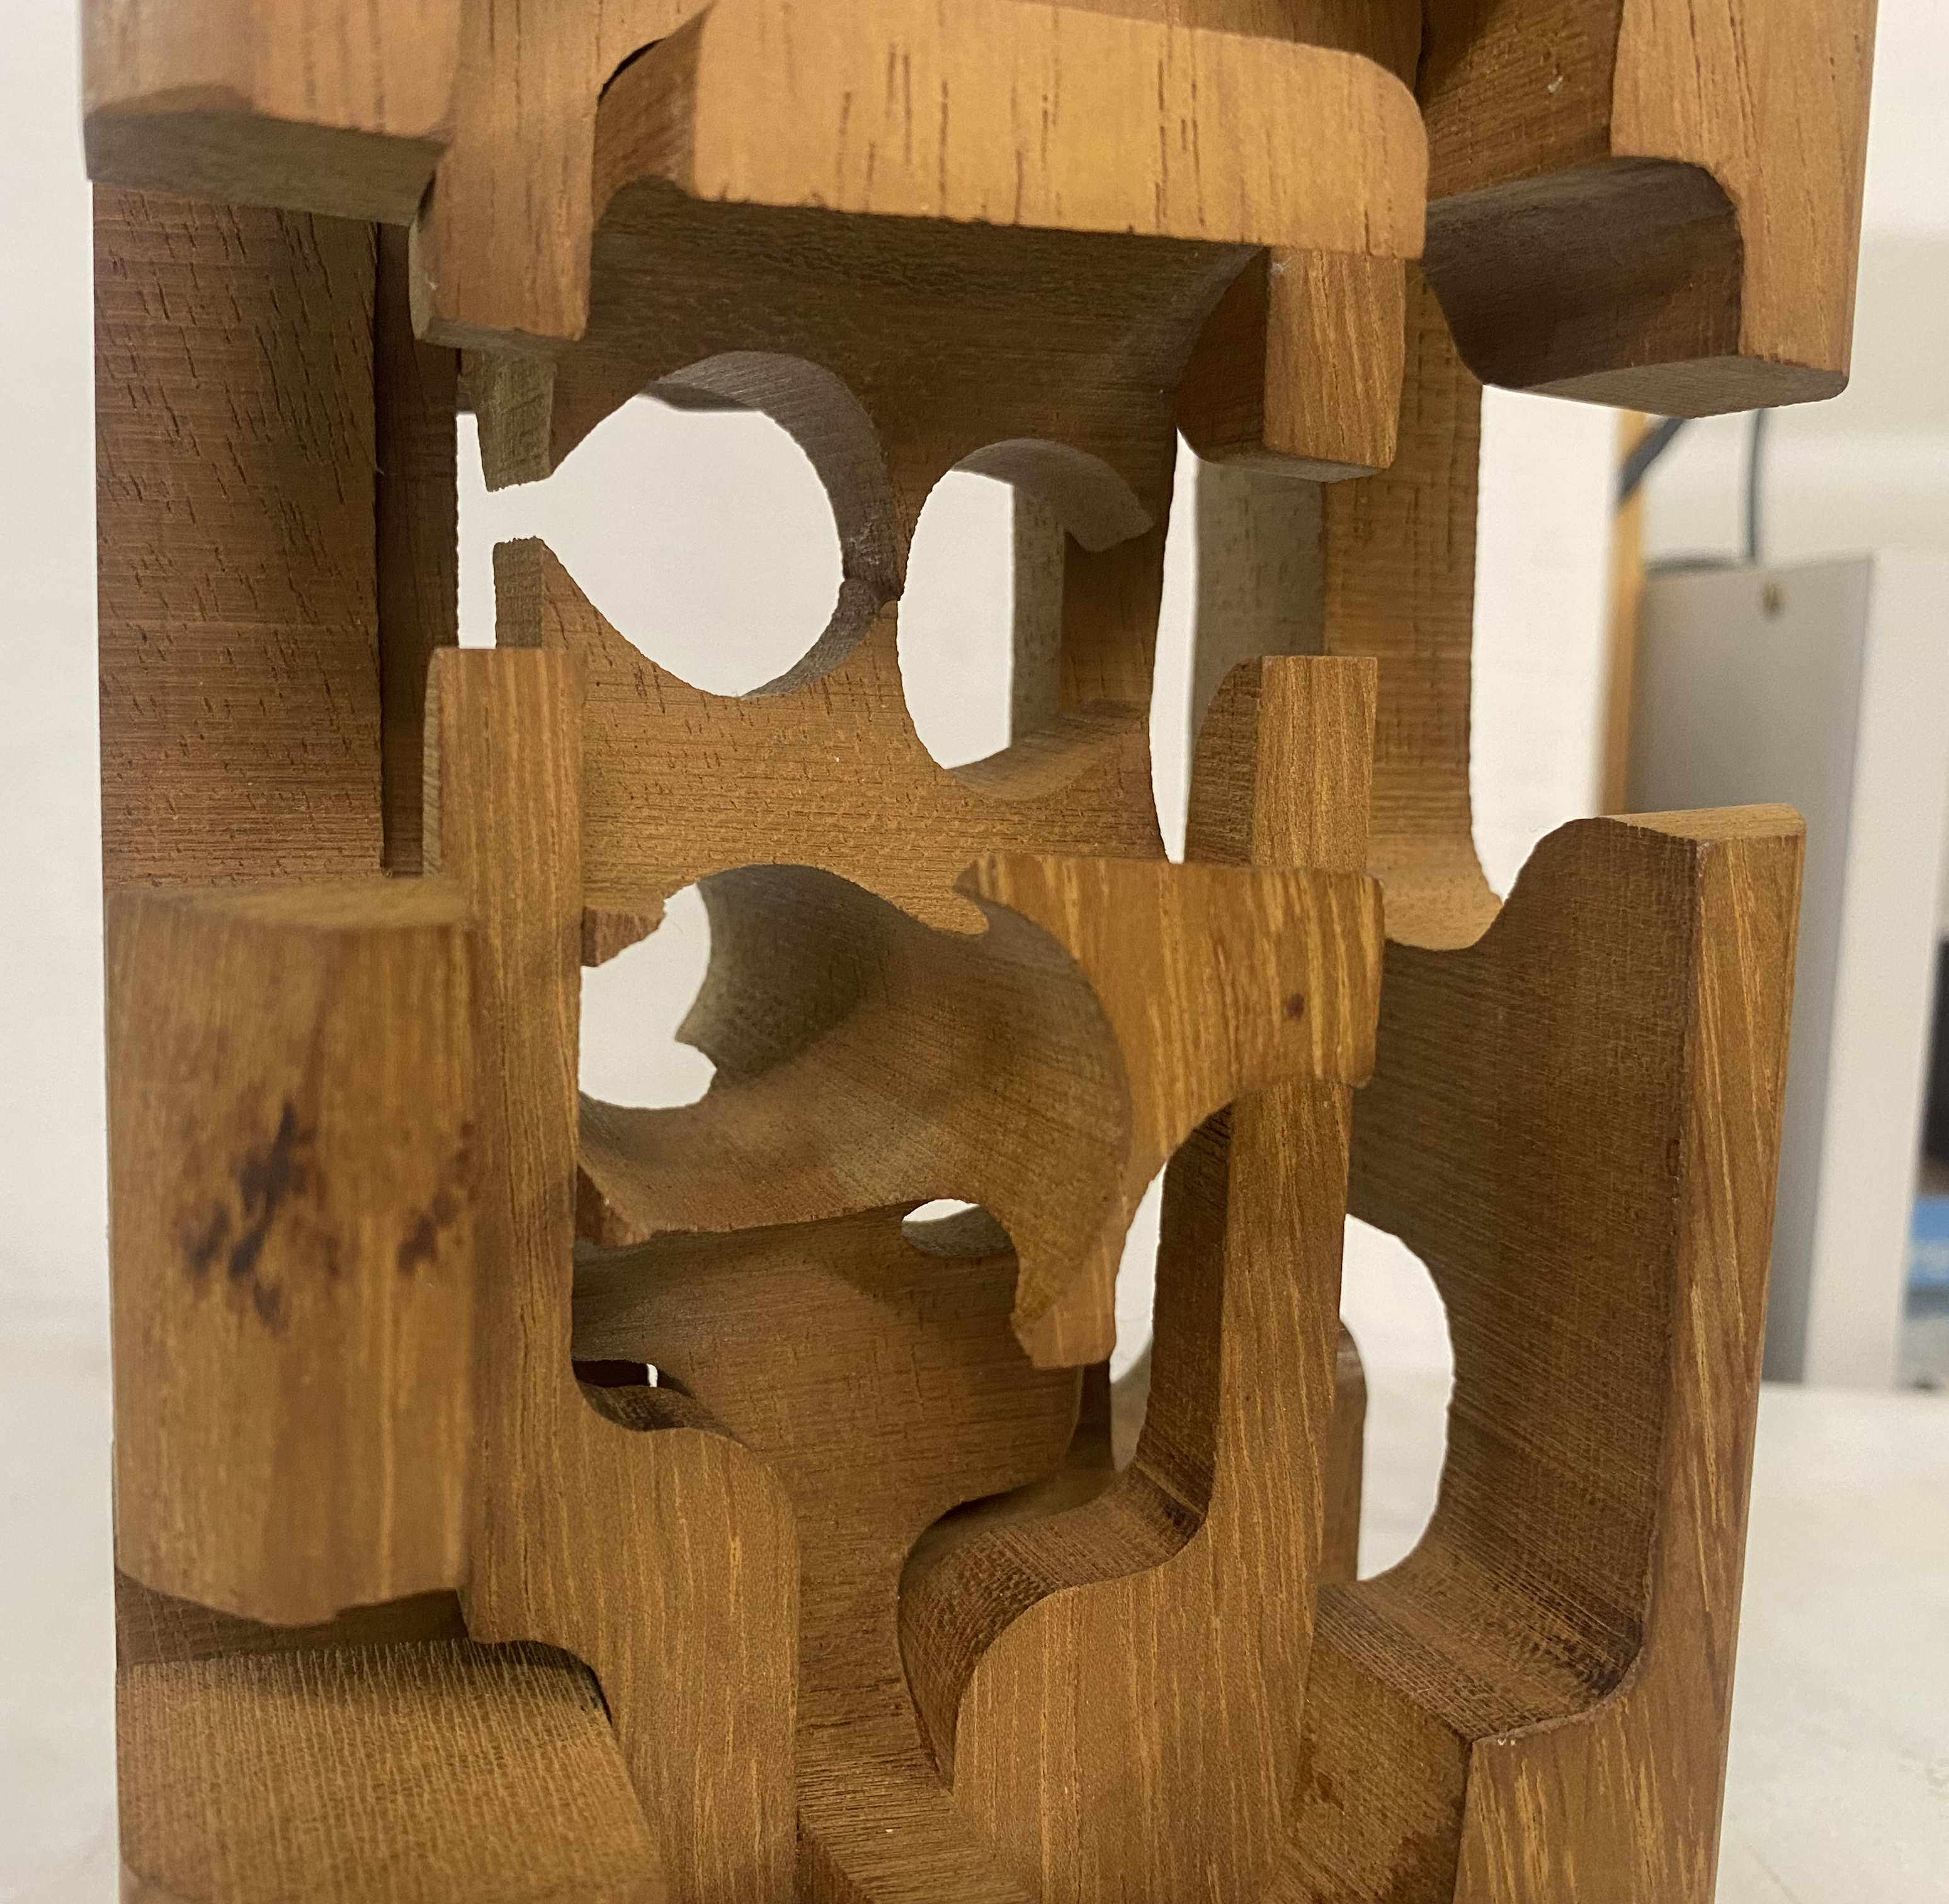 An abstract wooden sculpture attributed to Brian Willsher - Image 10 of 14